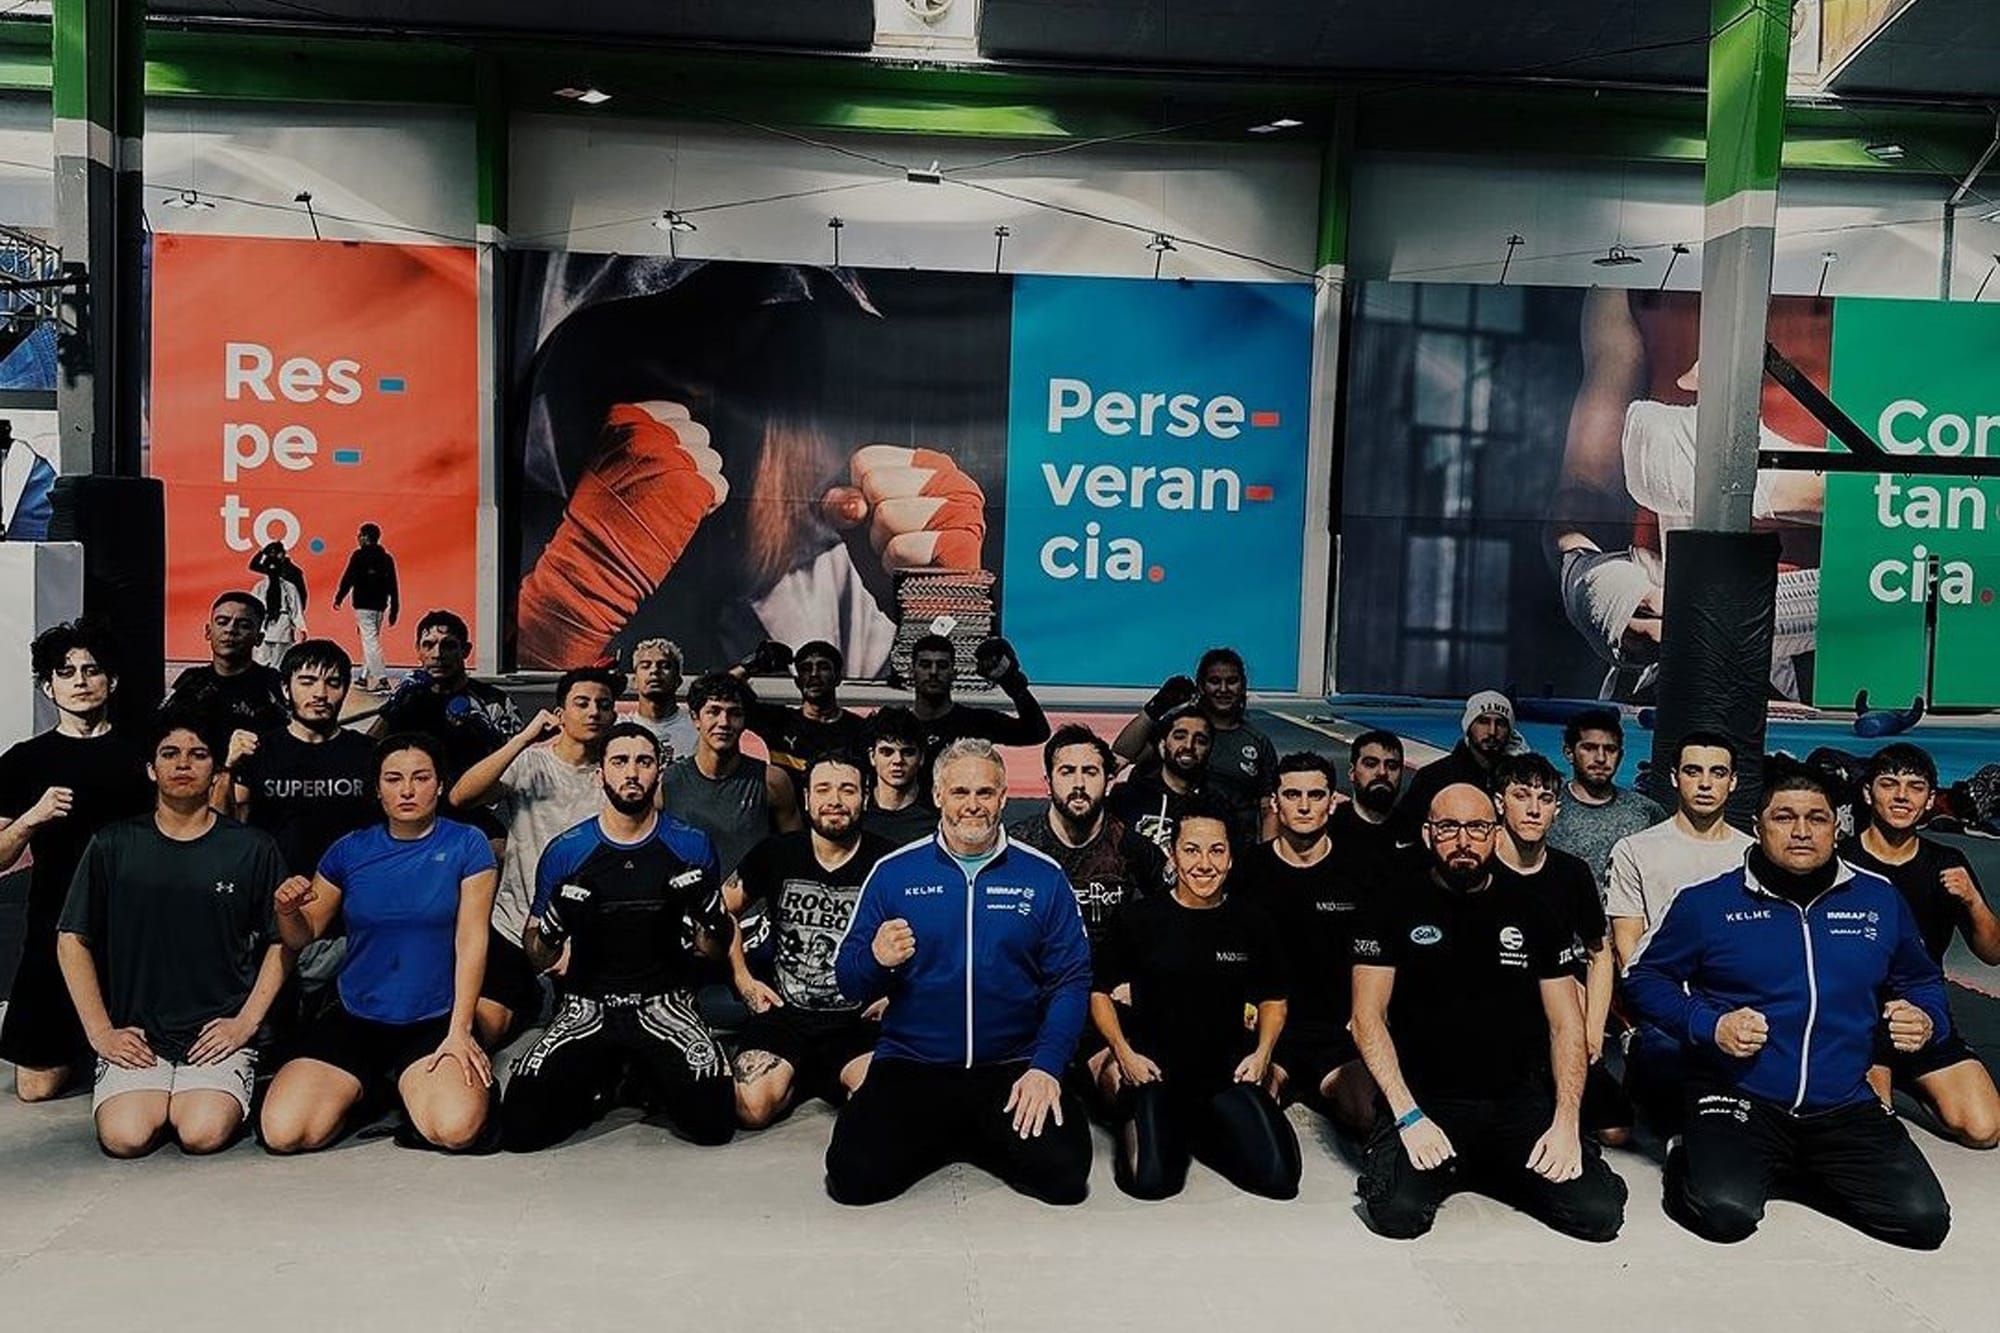 Uruguay National Federation Concludes Second National Grading Event